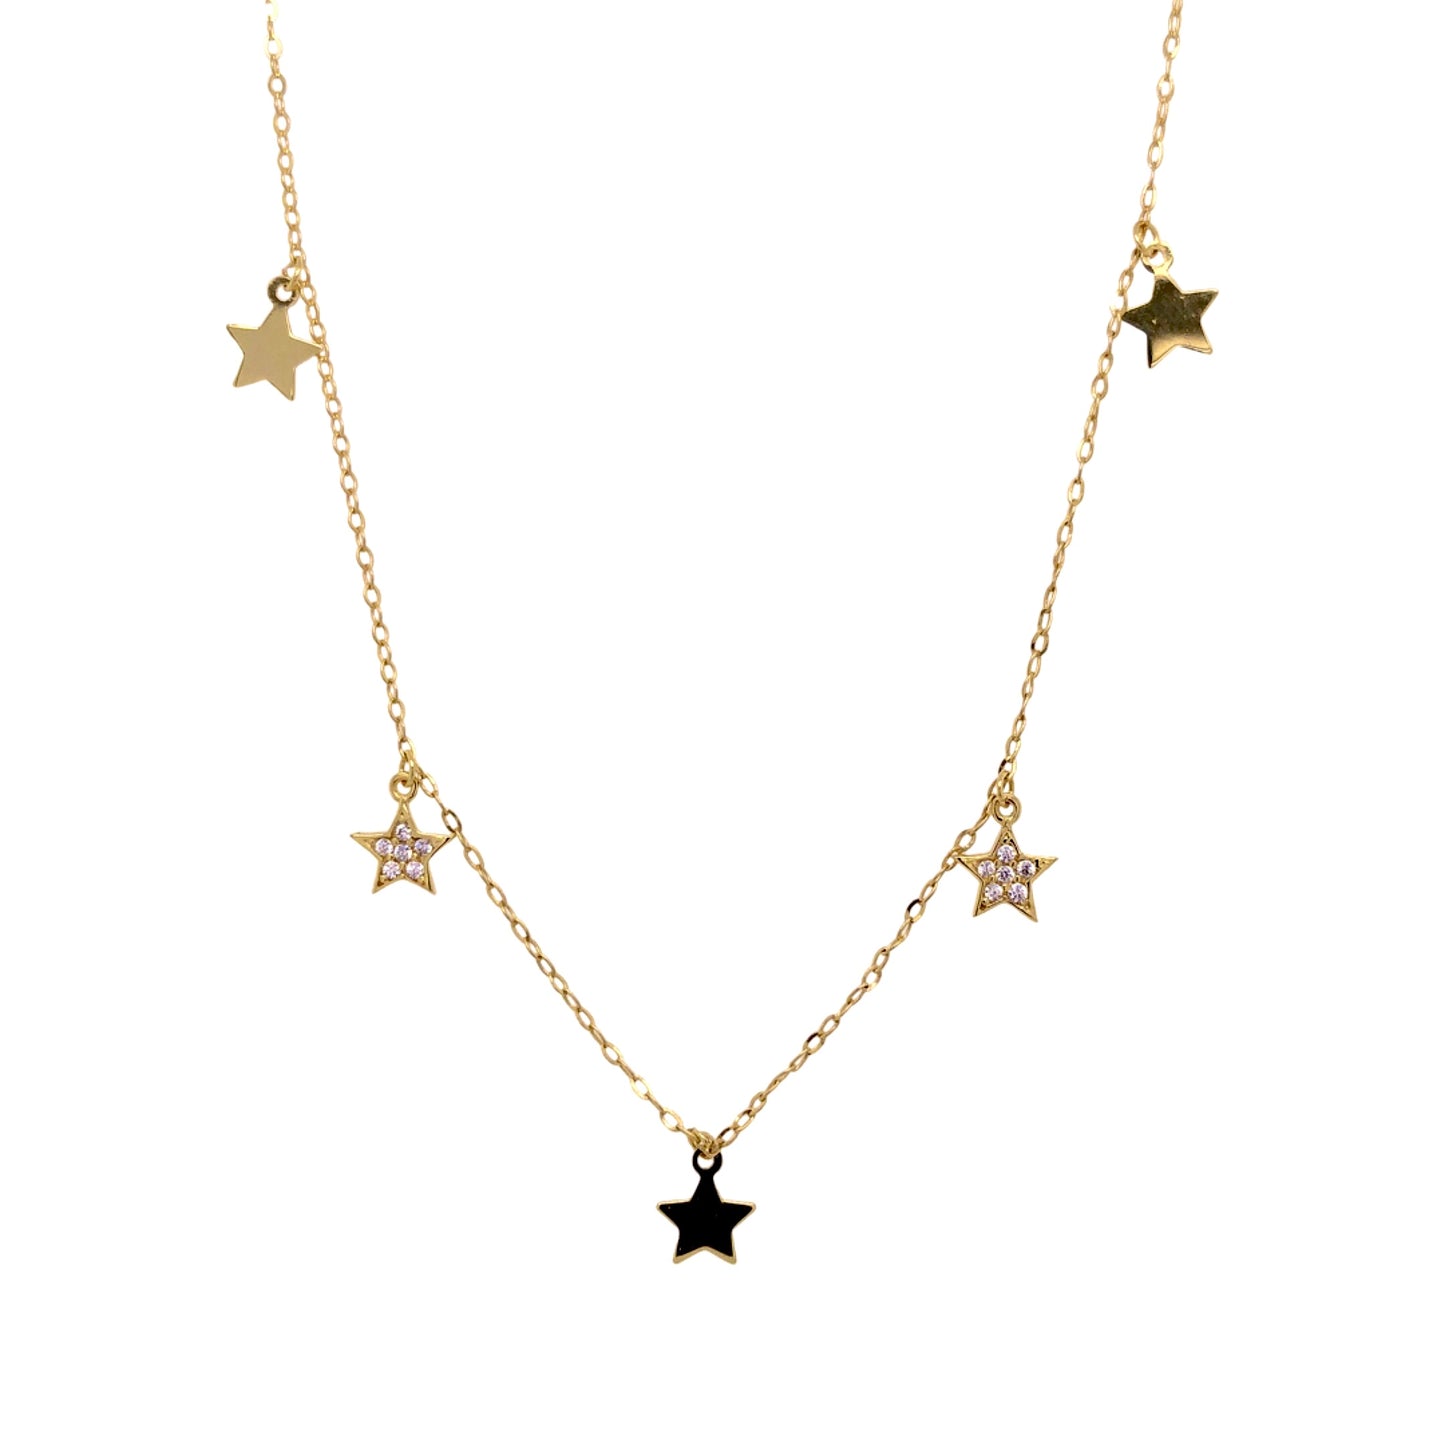 10k yellow gold anklet with cz star charms 